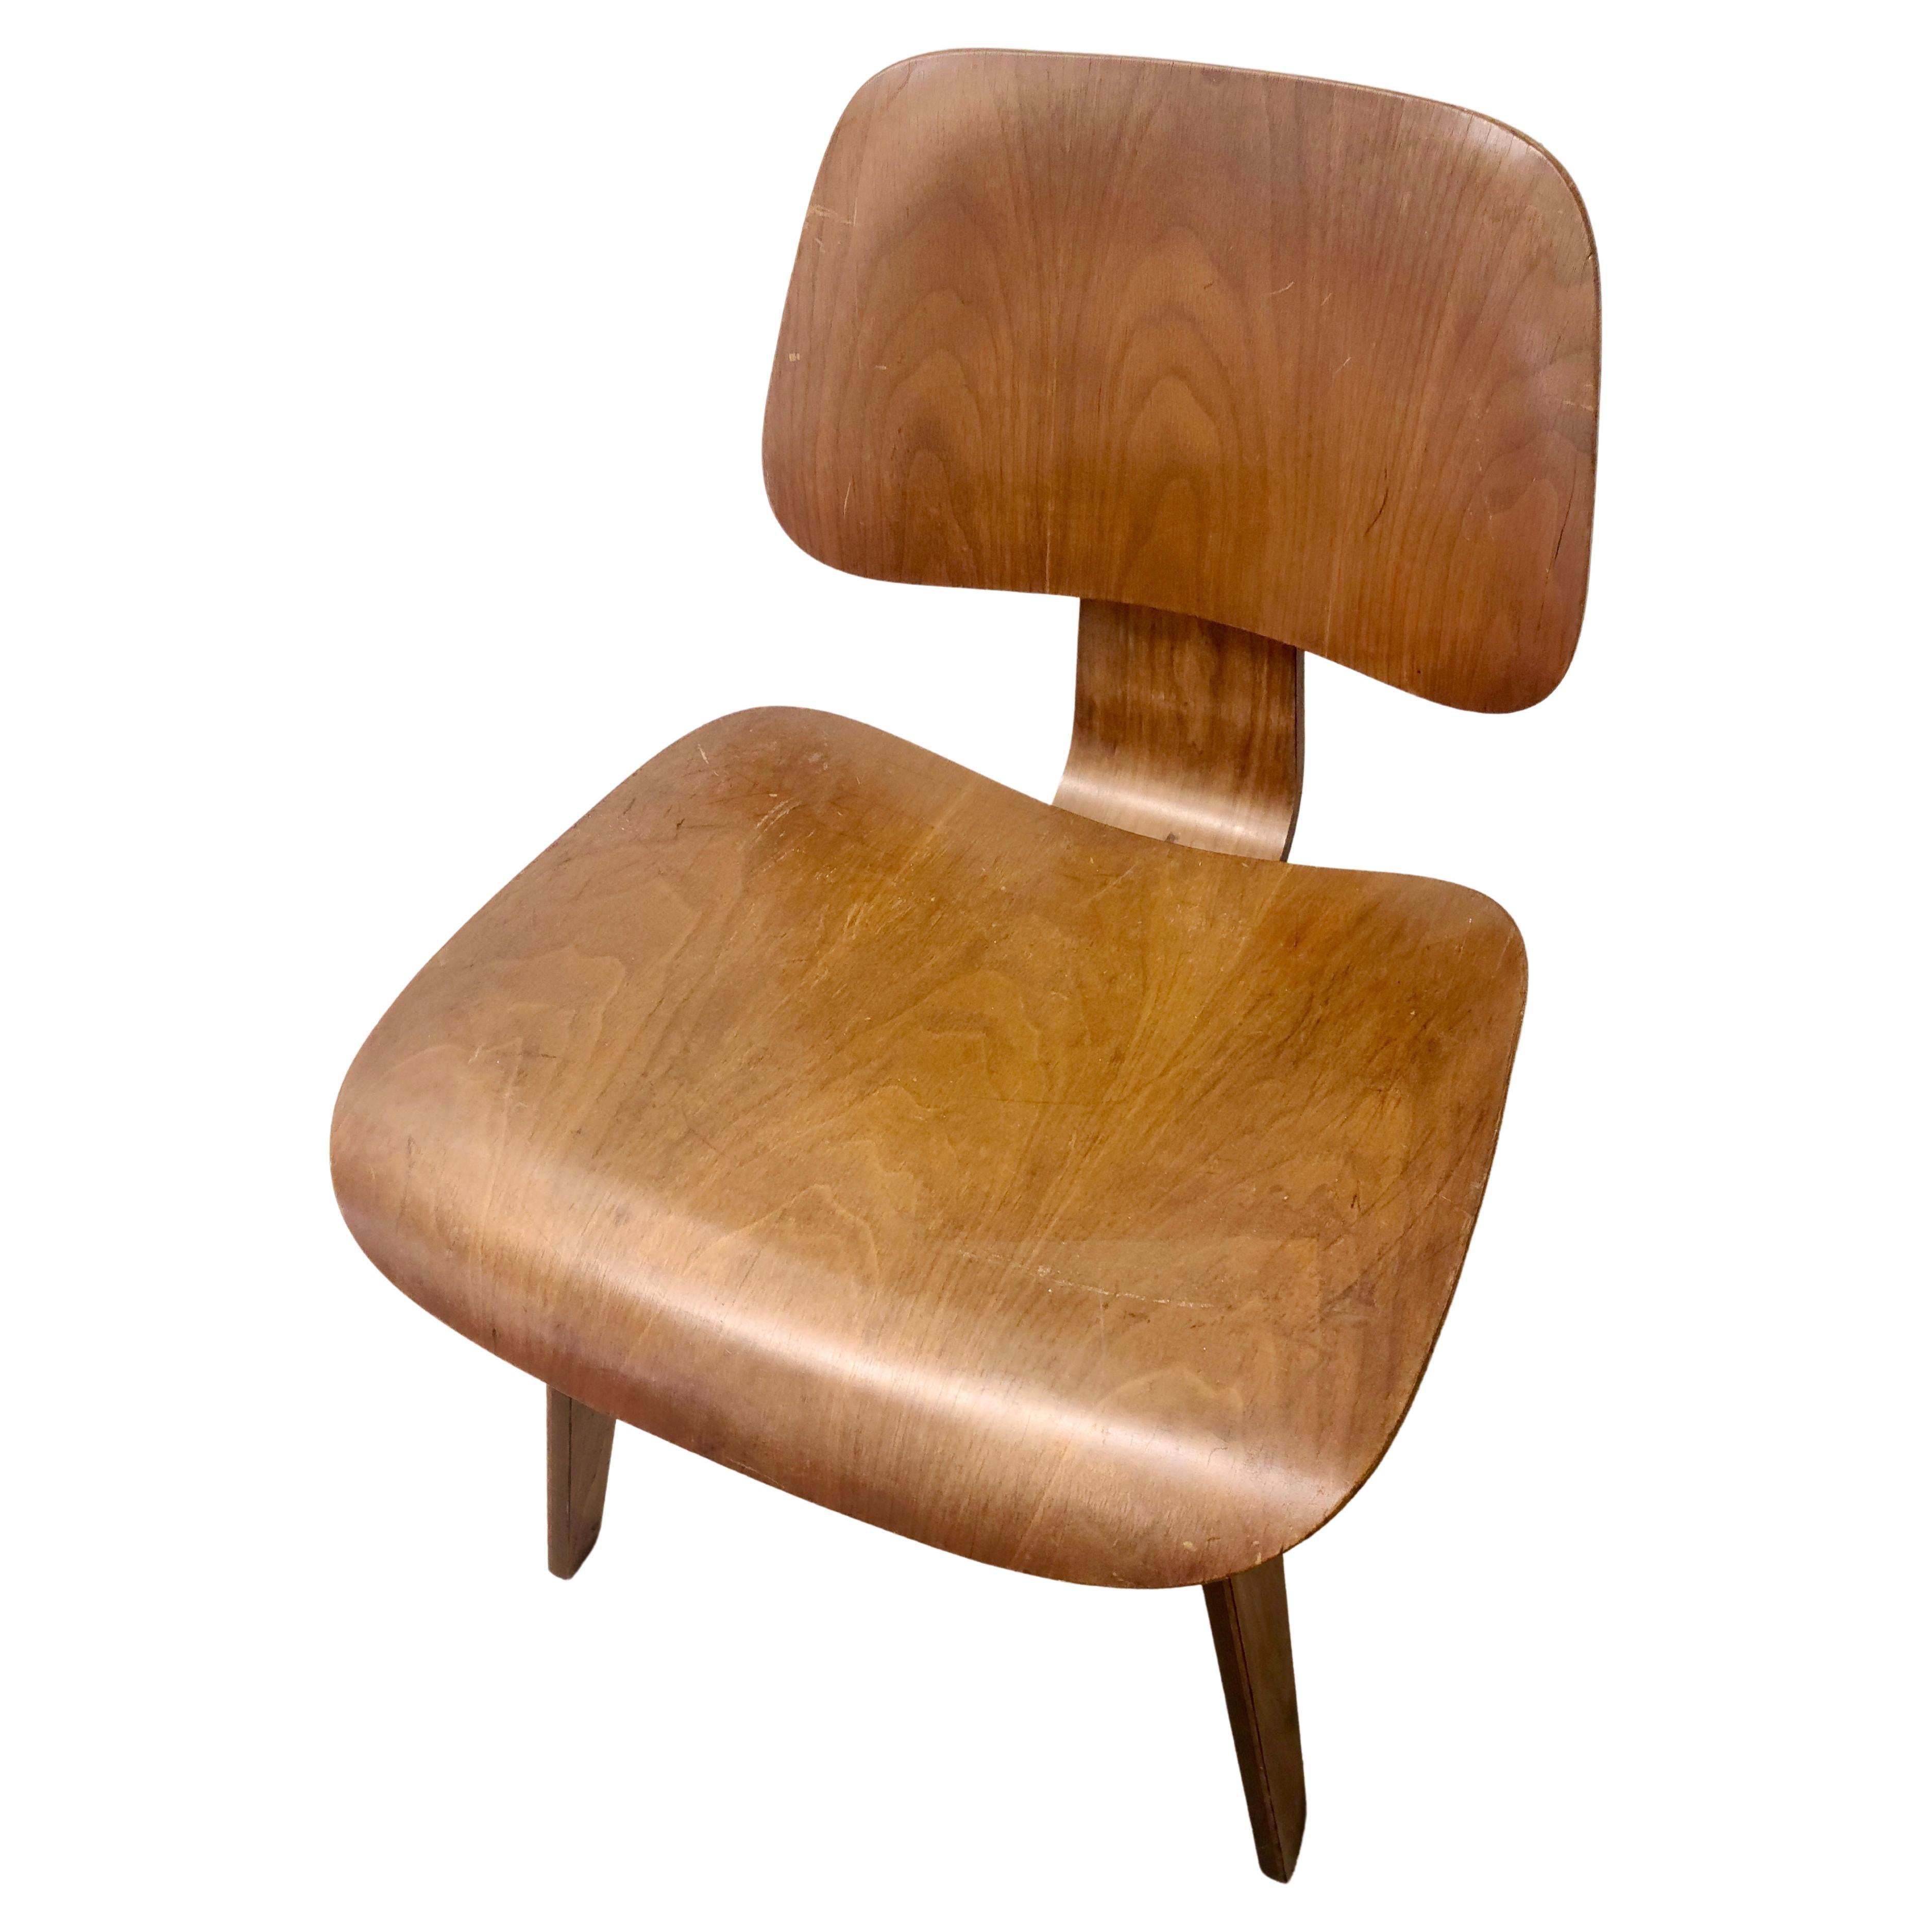 Mid-20th Century Eames Herman Miller Molded Plywood Walnut DCW Dining Chair Wood For Sale